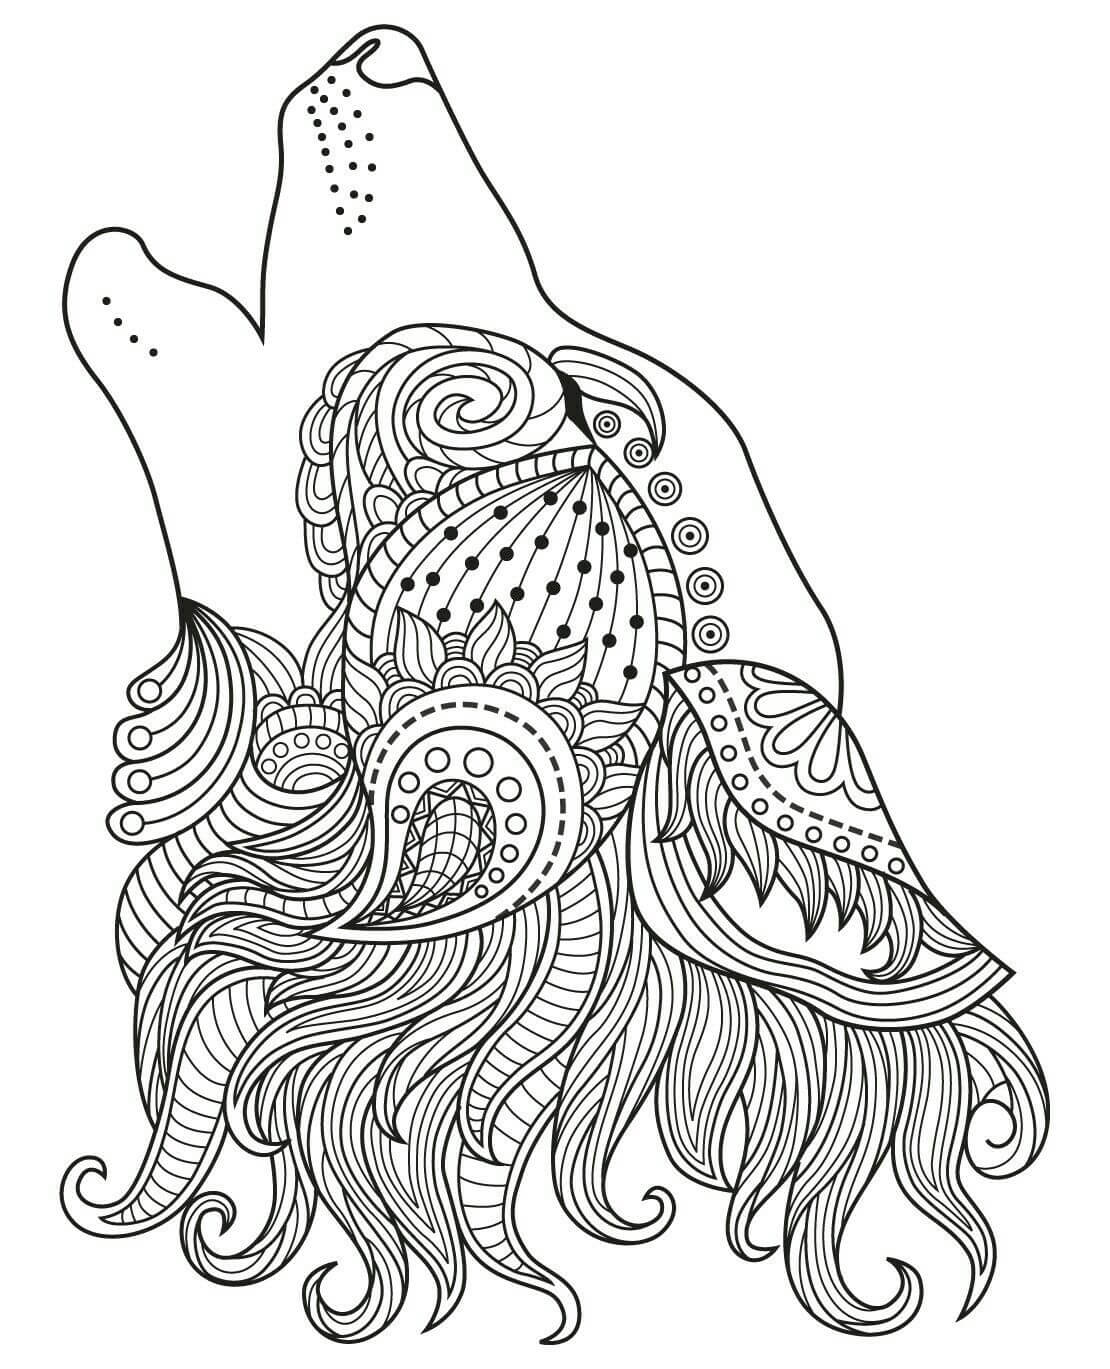 Howling Wolf Coloring Pages for Adults